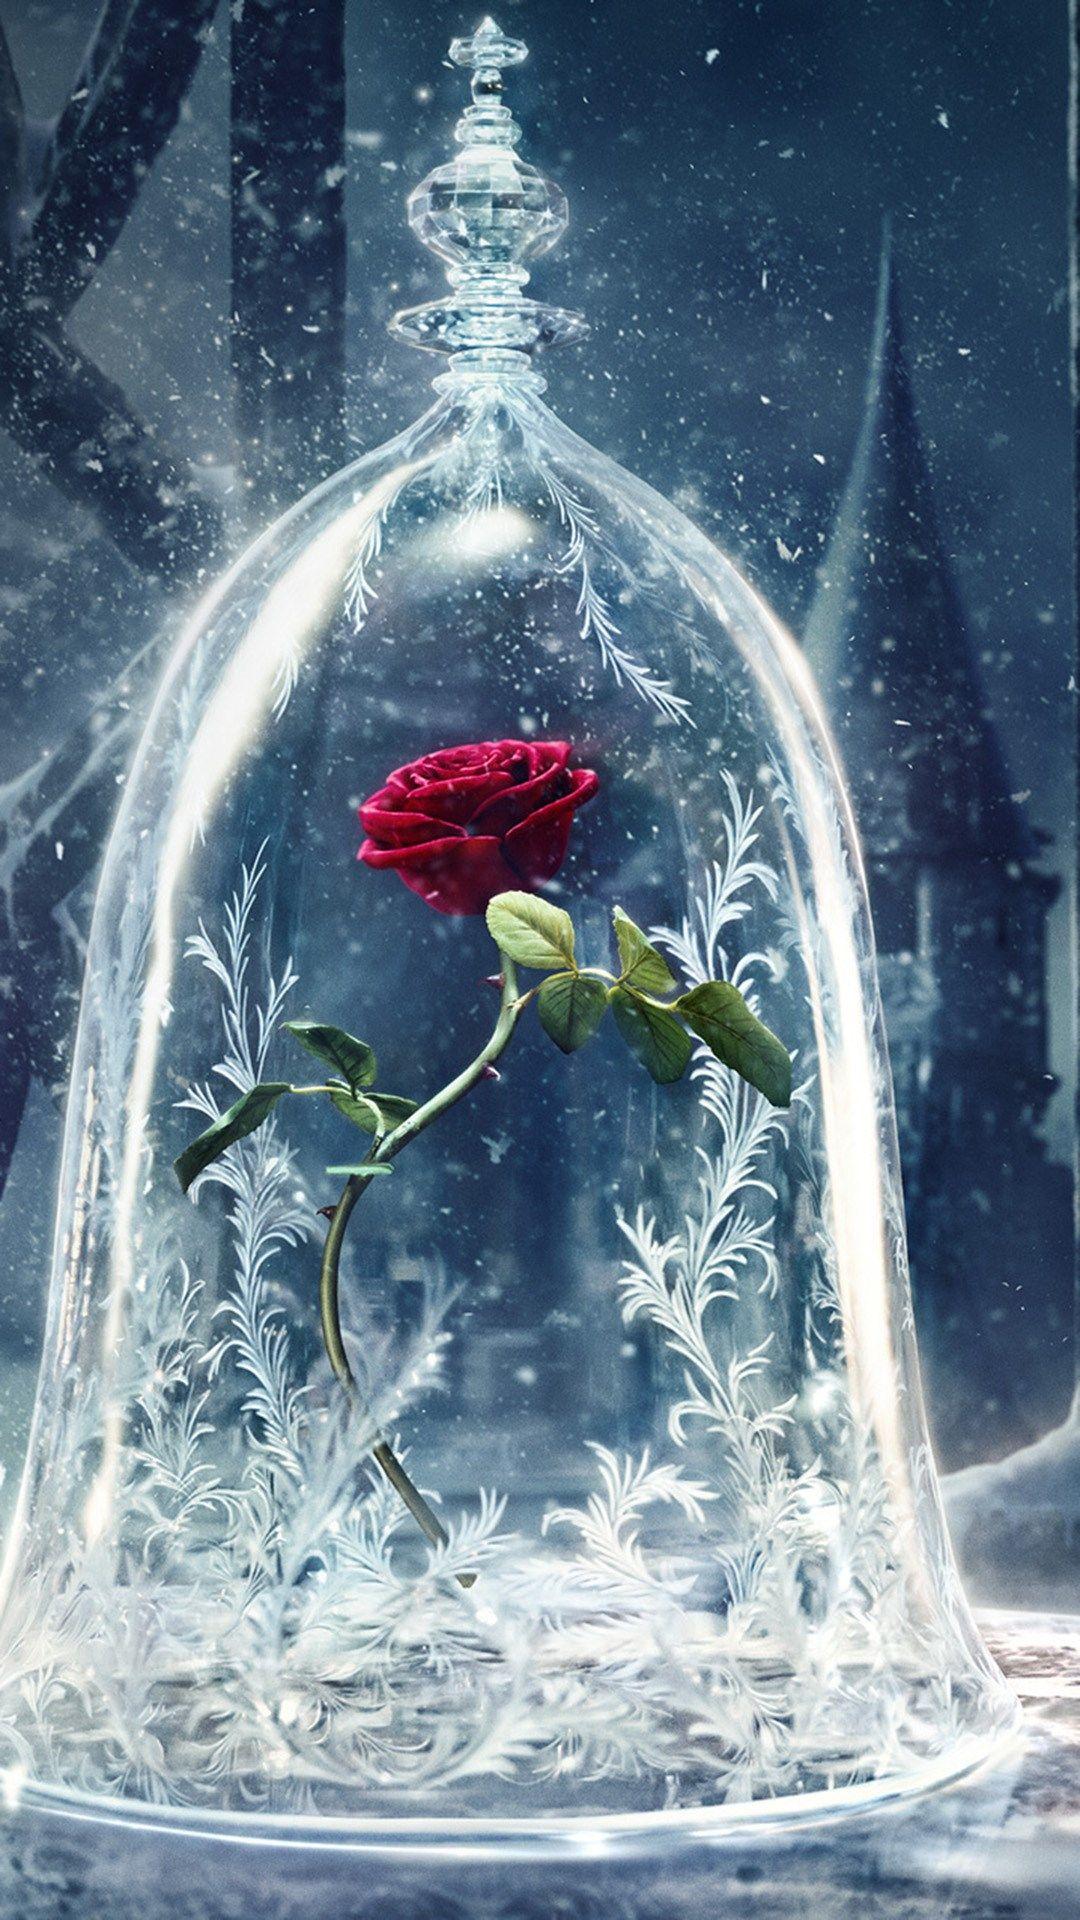 Beauty and the Beast Castle Icy Bell Rose Snowflake #iPhone #wallpaper. Beast wallpaper, iPhone background disney, Disney wallpaper